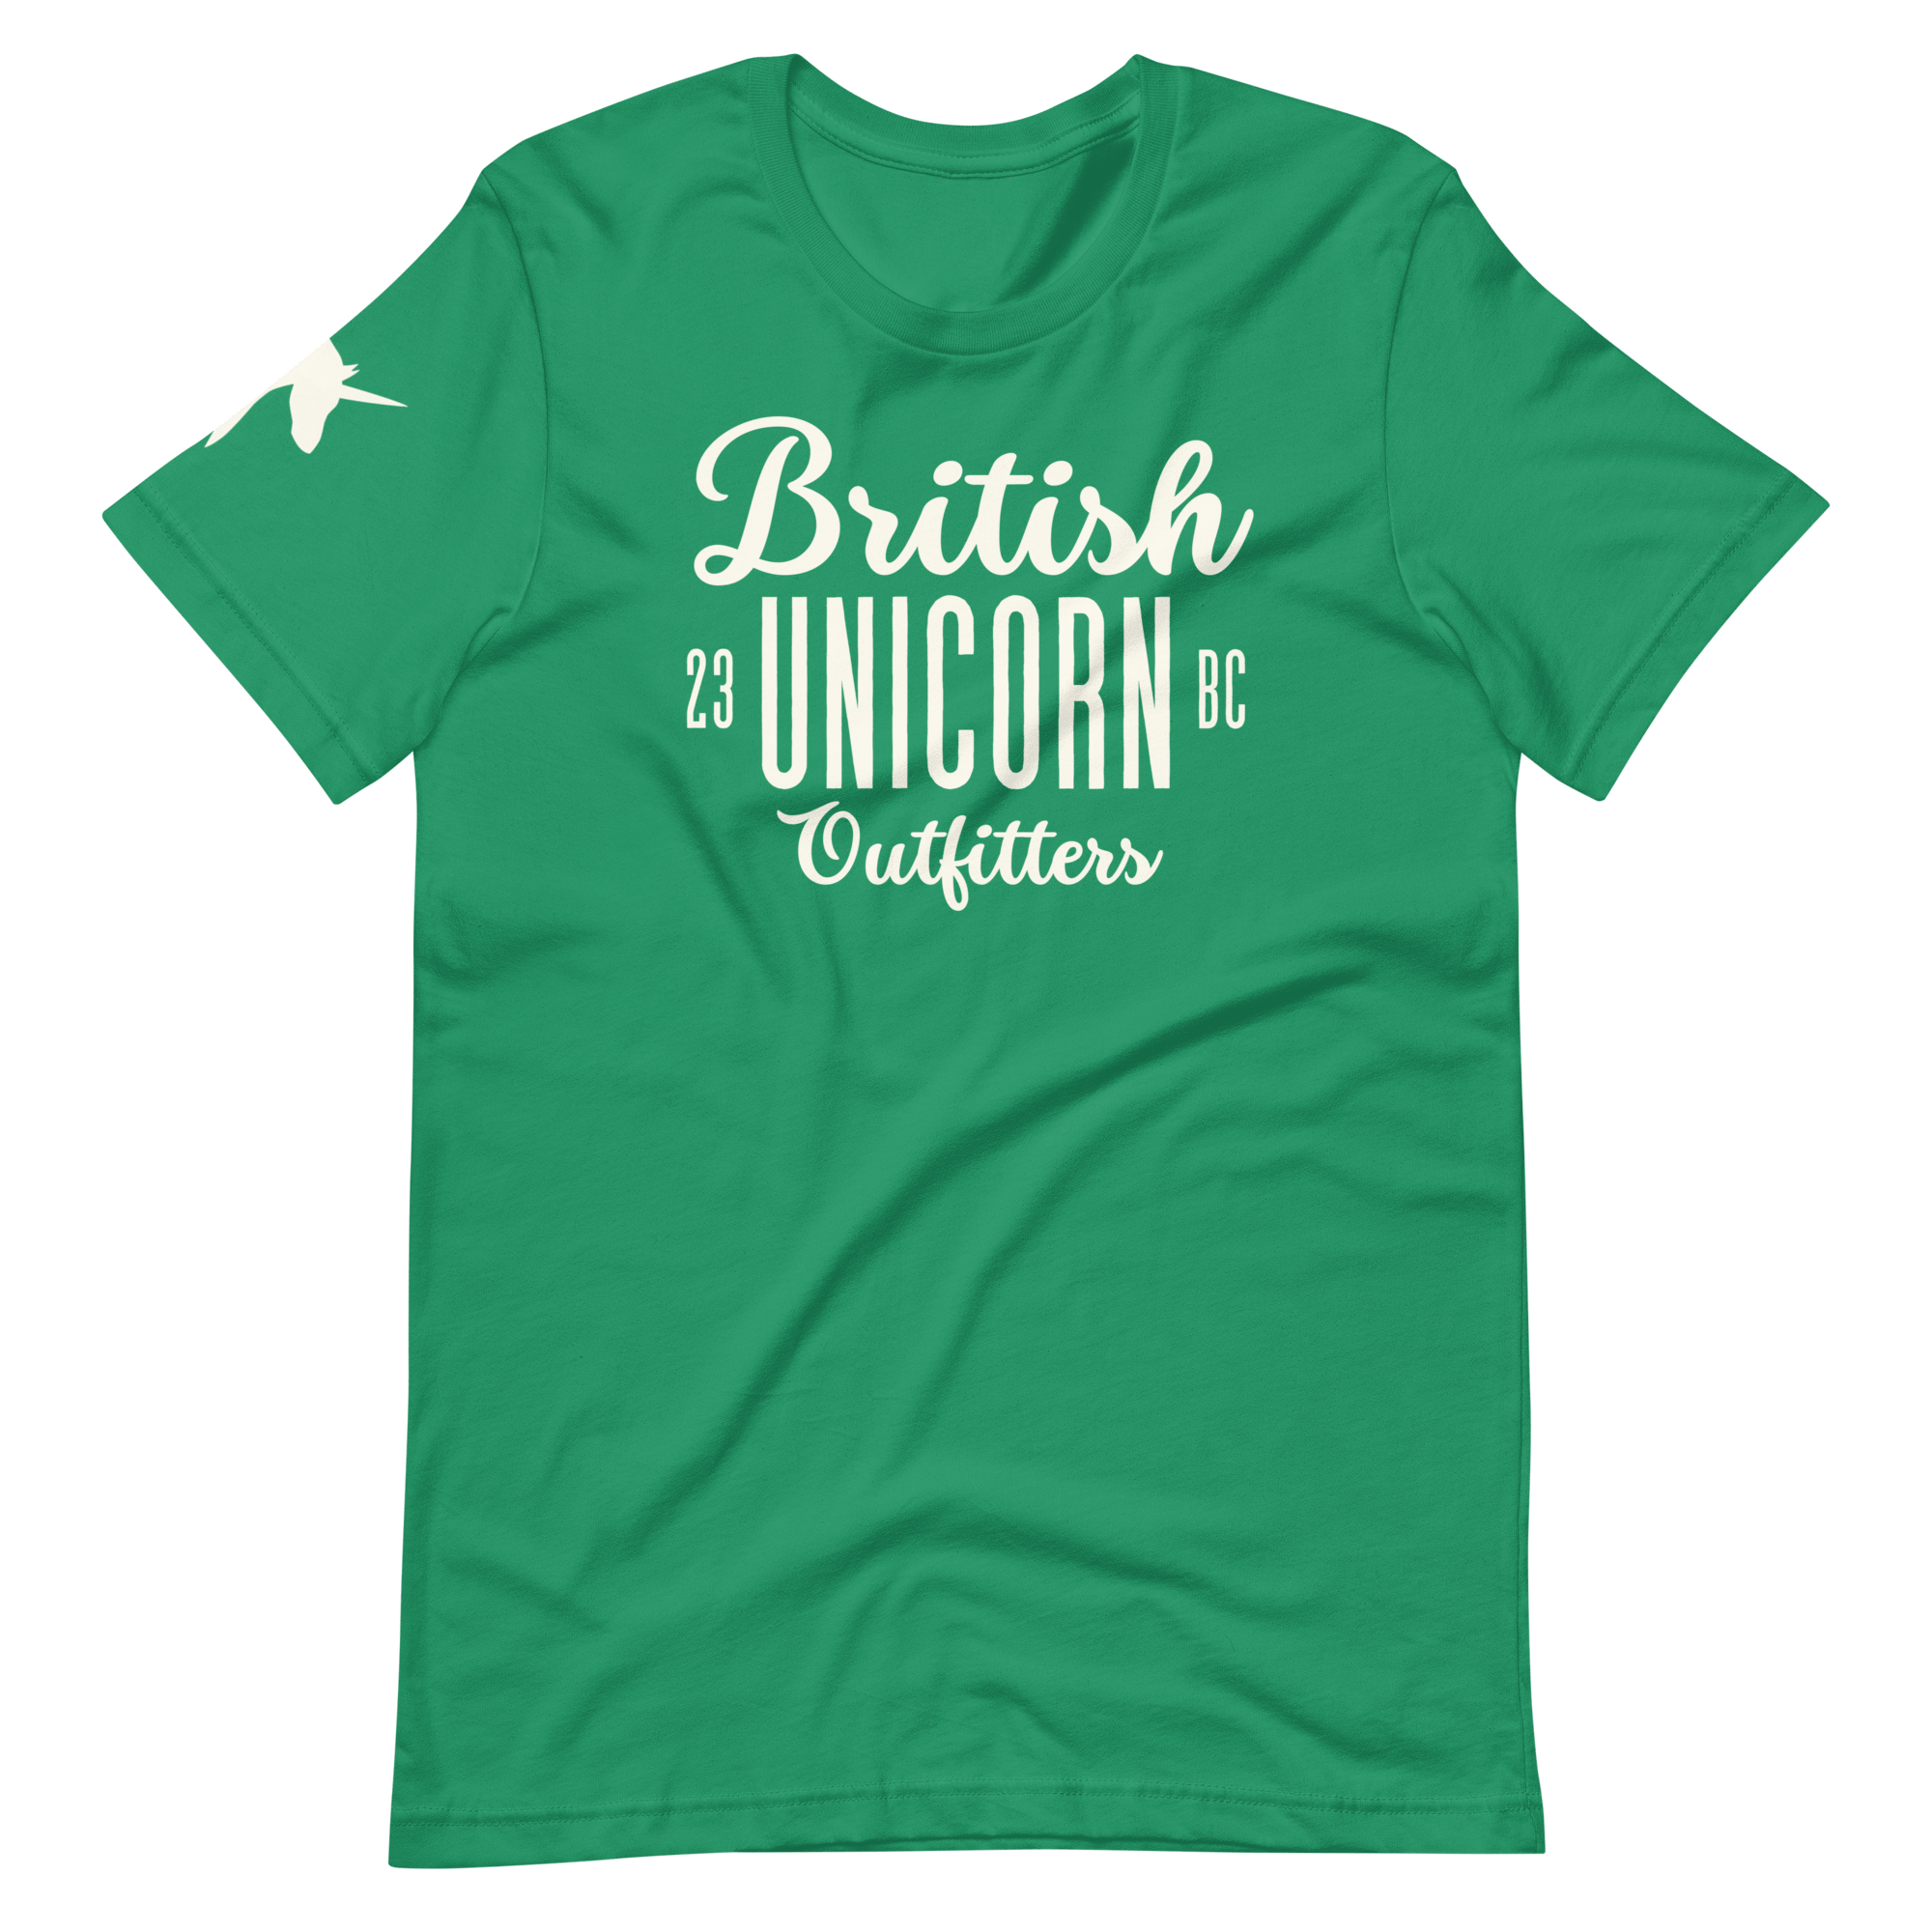 British Unicorn Outfitters T-shirt | Sleeve | Unisex Shirts & Tops Jolly & Goode